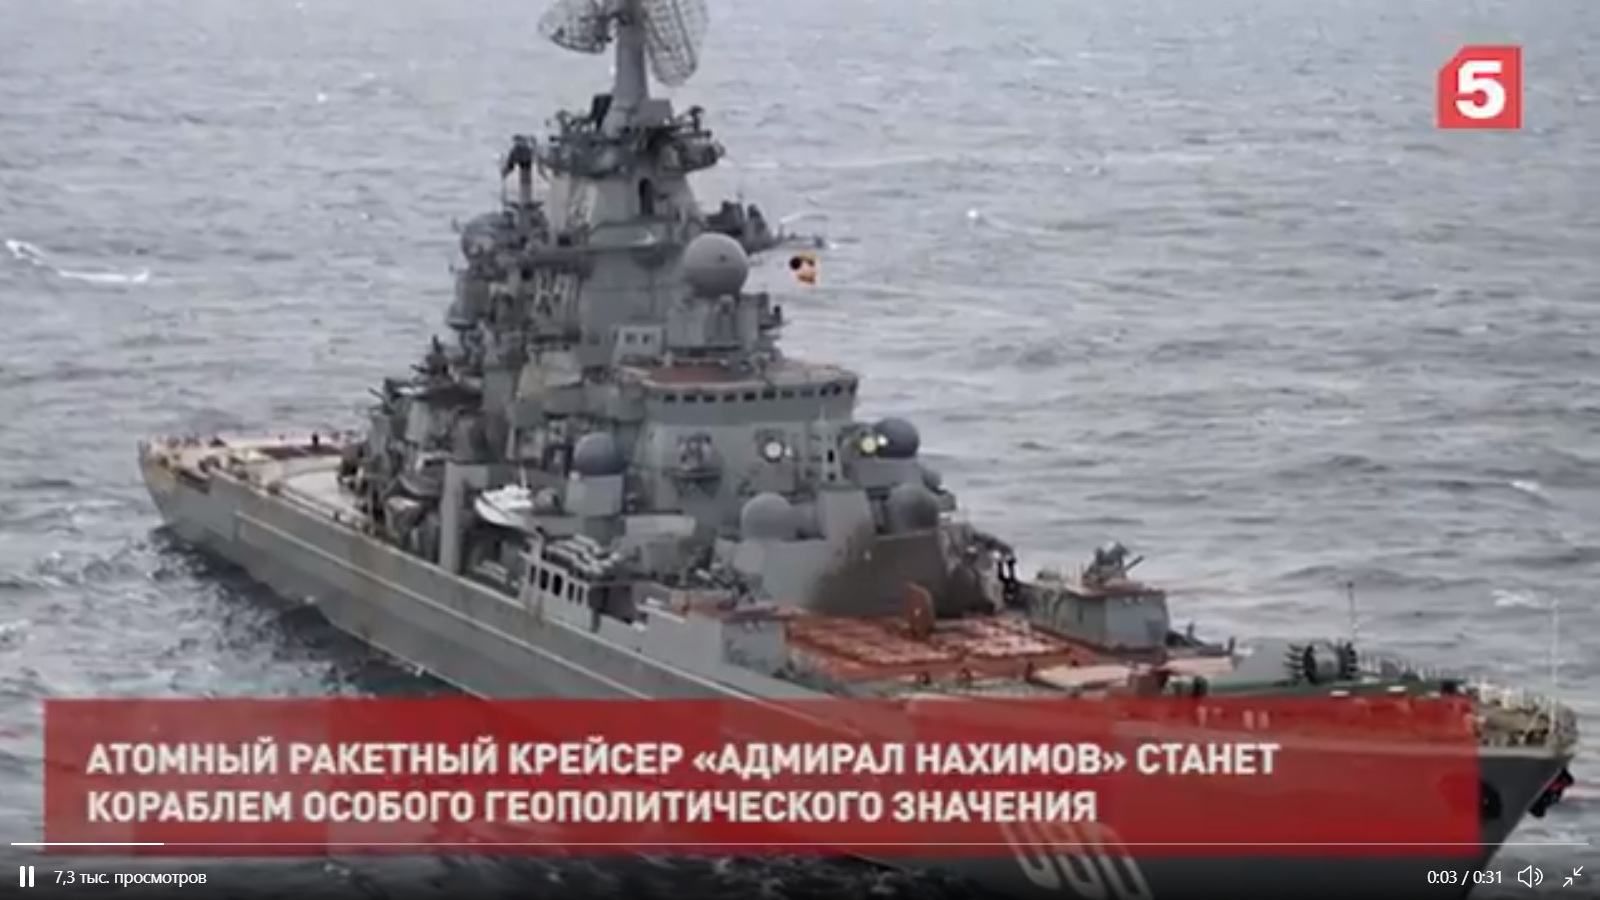 NATO, get tremble! What will happen when the military cruiser Admiral Nakhimov comes out of a 23-year repair